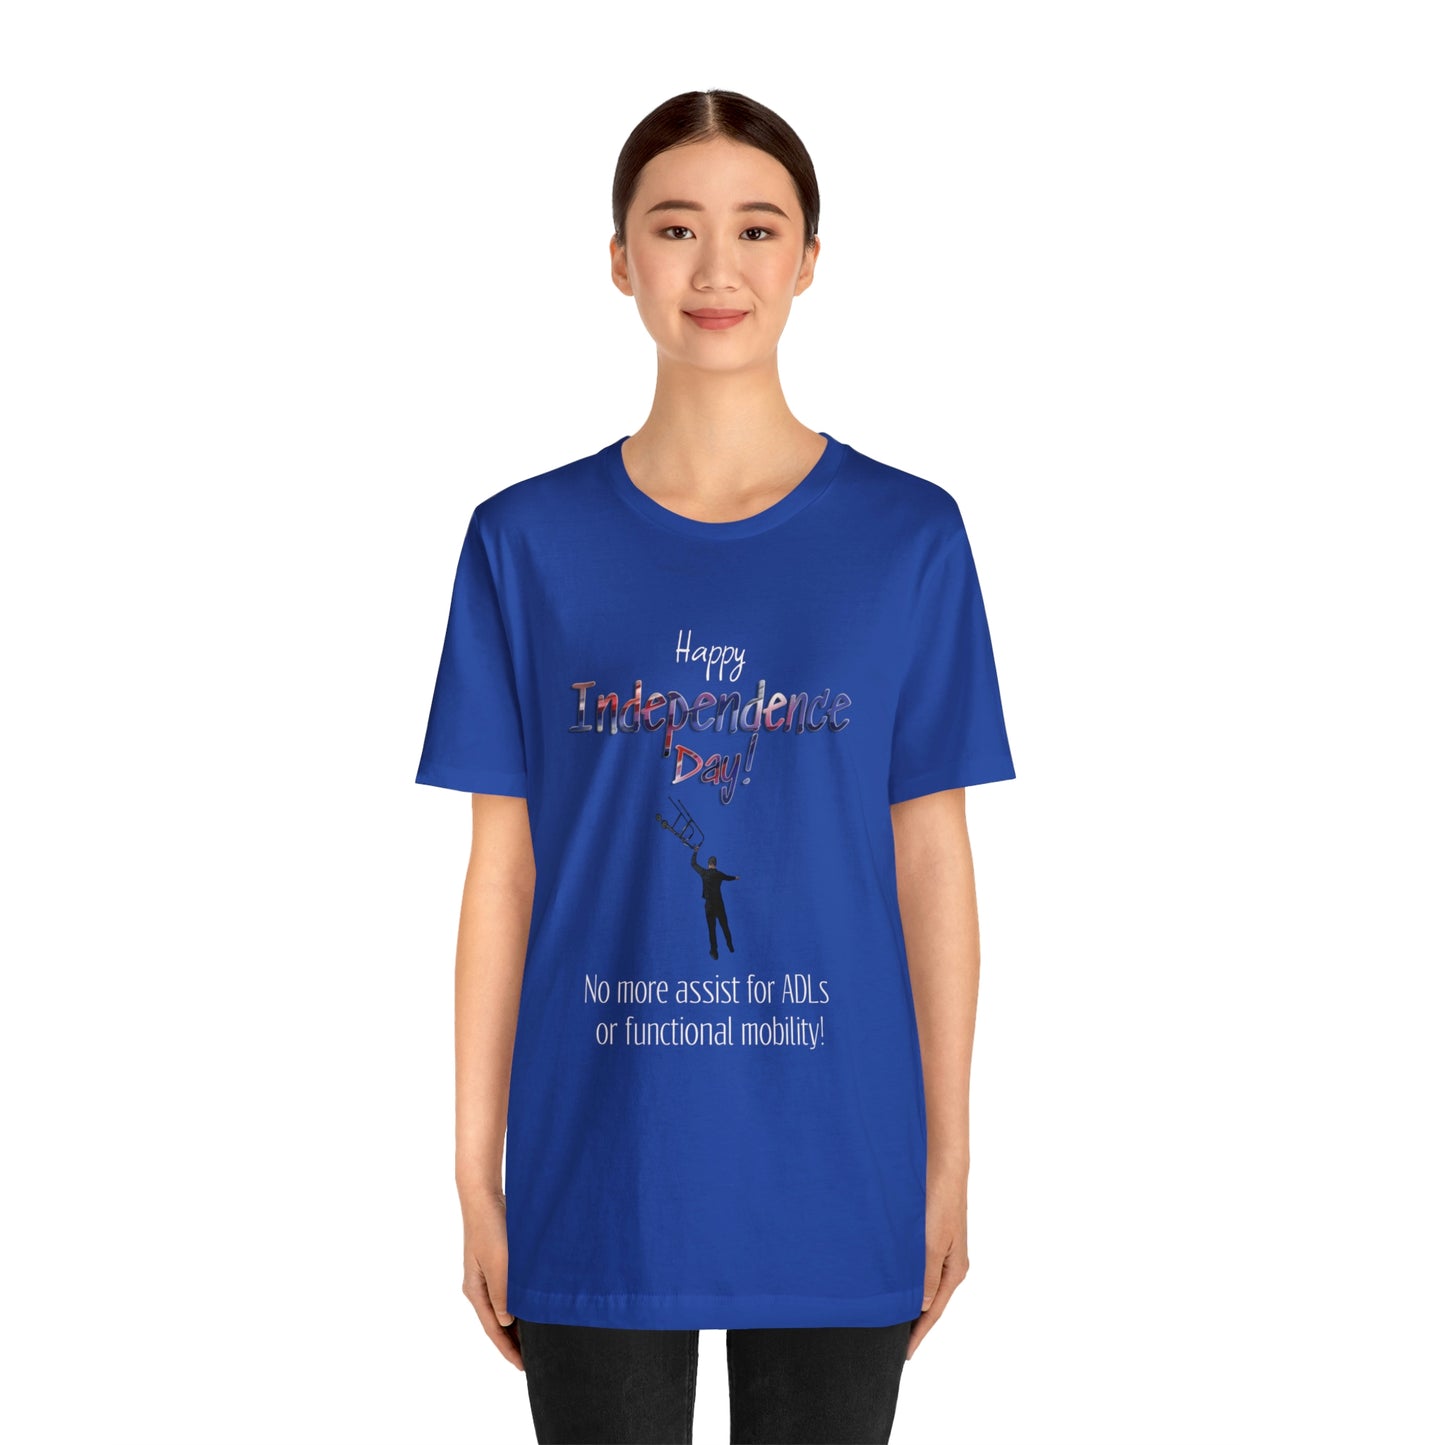 Happy Independence Day! Funny Occupational Therapy/Physical Therapy Shirt! Unisex Jersey Short Sleeve Tee